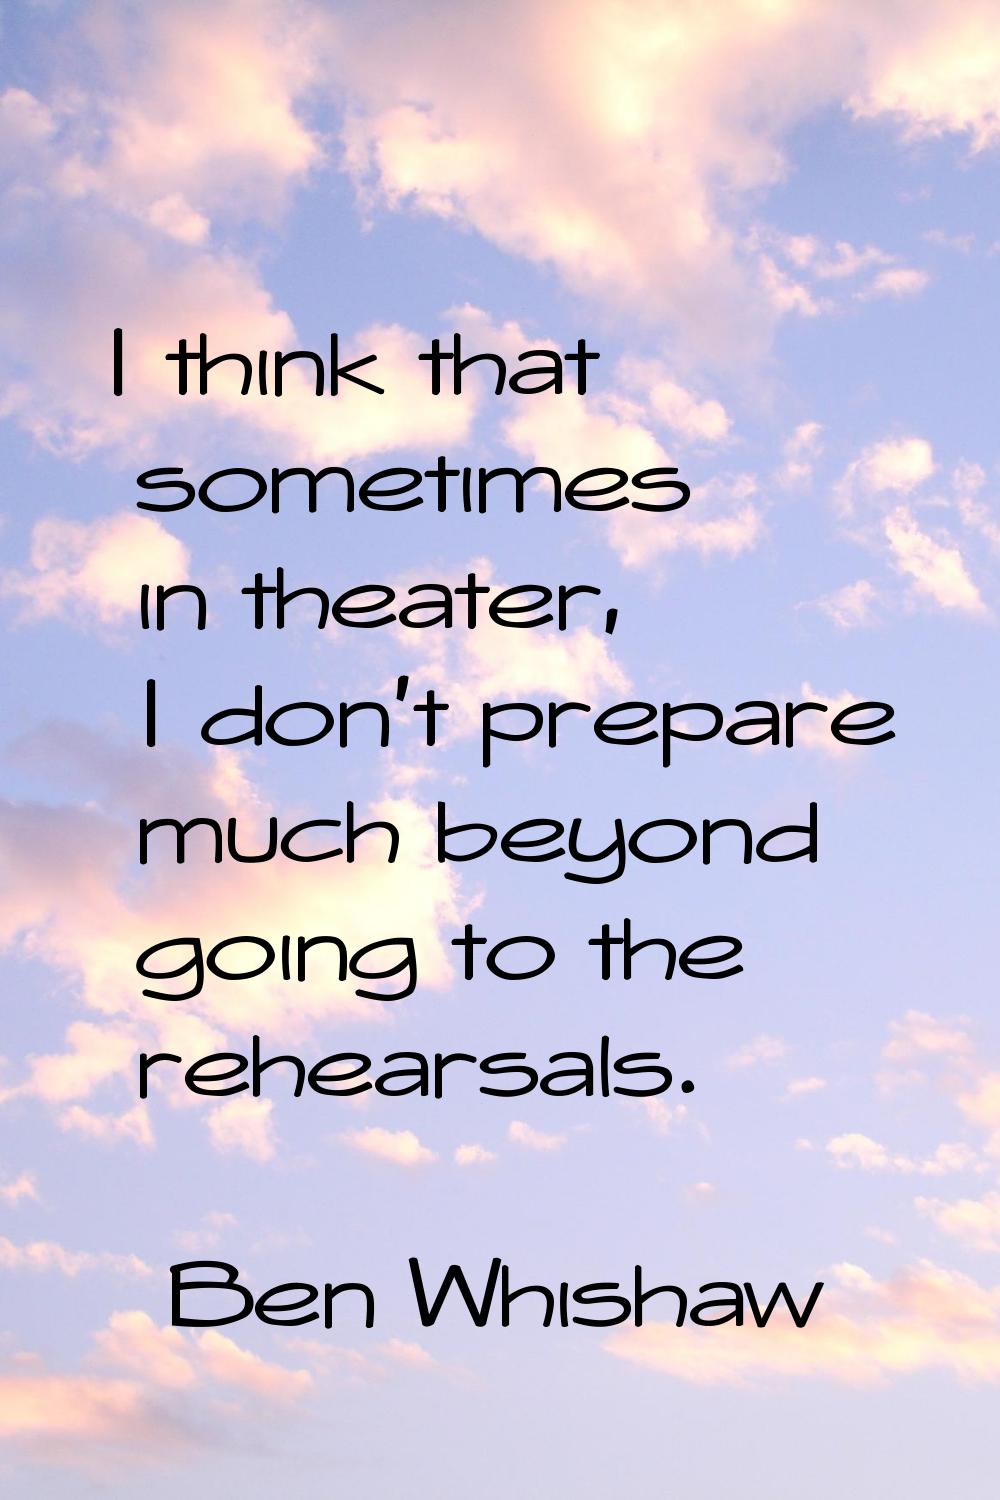 I think that sometimes in theater, I don't prepare much beyond going to the rehearsals.